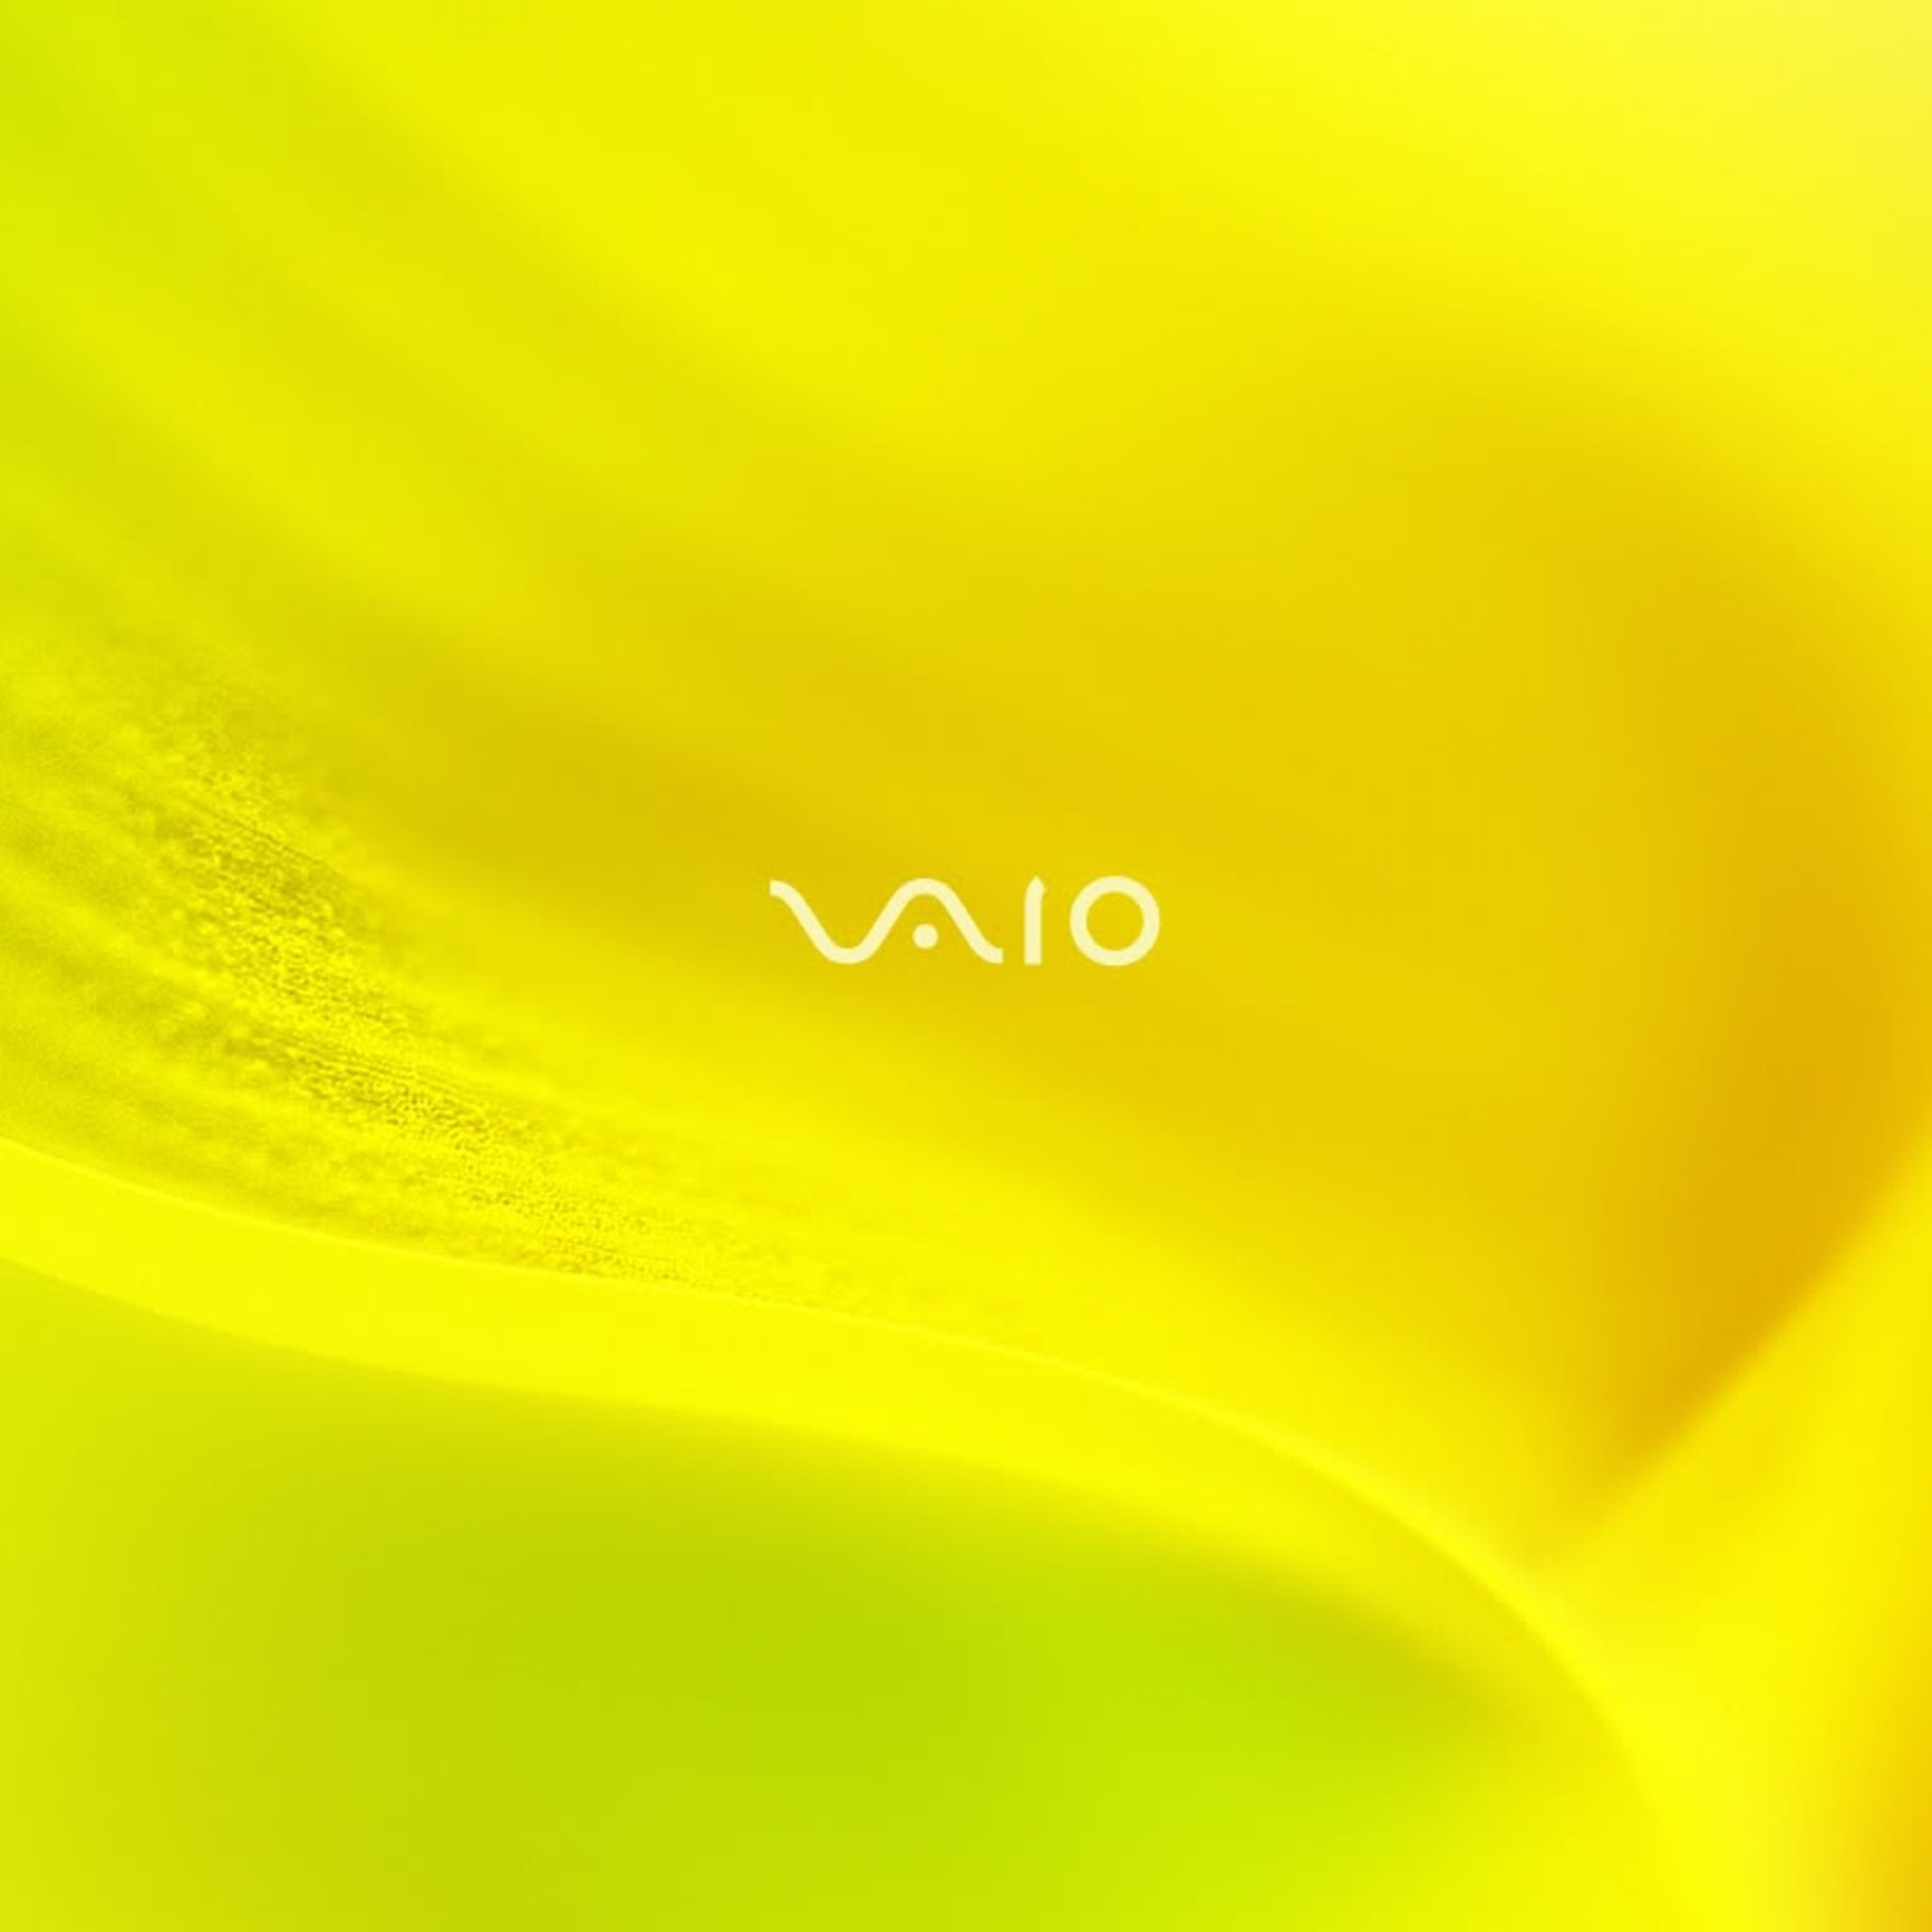 2932x2932 Sony Vaio Yellow System Ipad Pro Retina Display Wallpaper Hd Hi Tech 4k Wallpapers Images Photos And Background